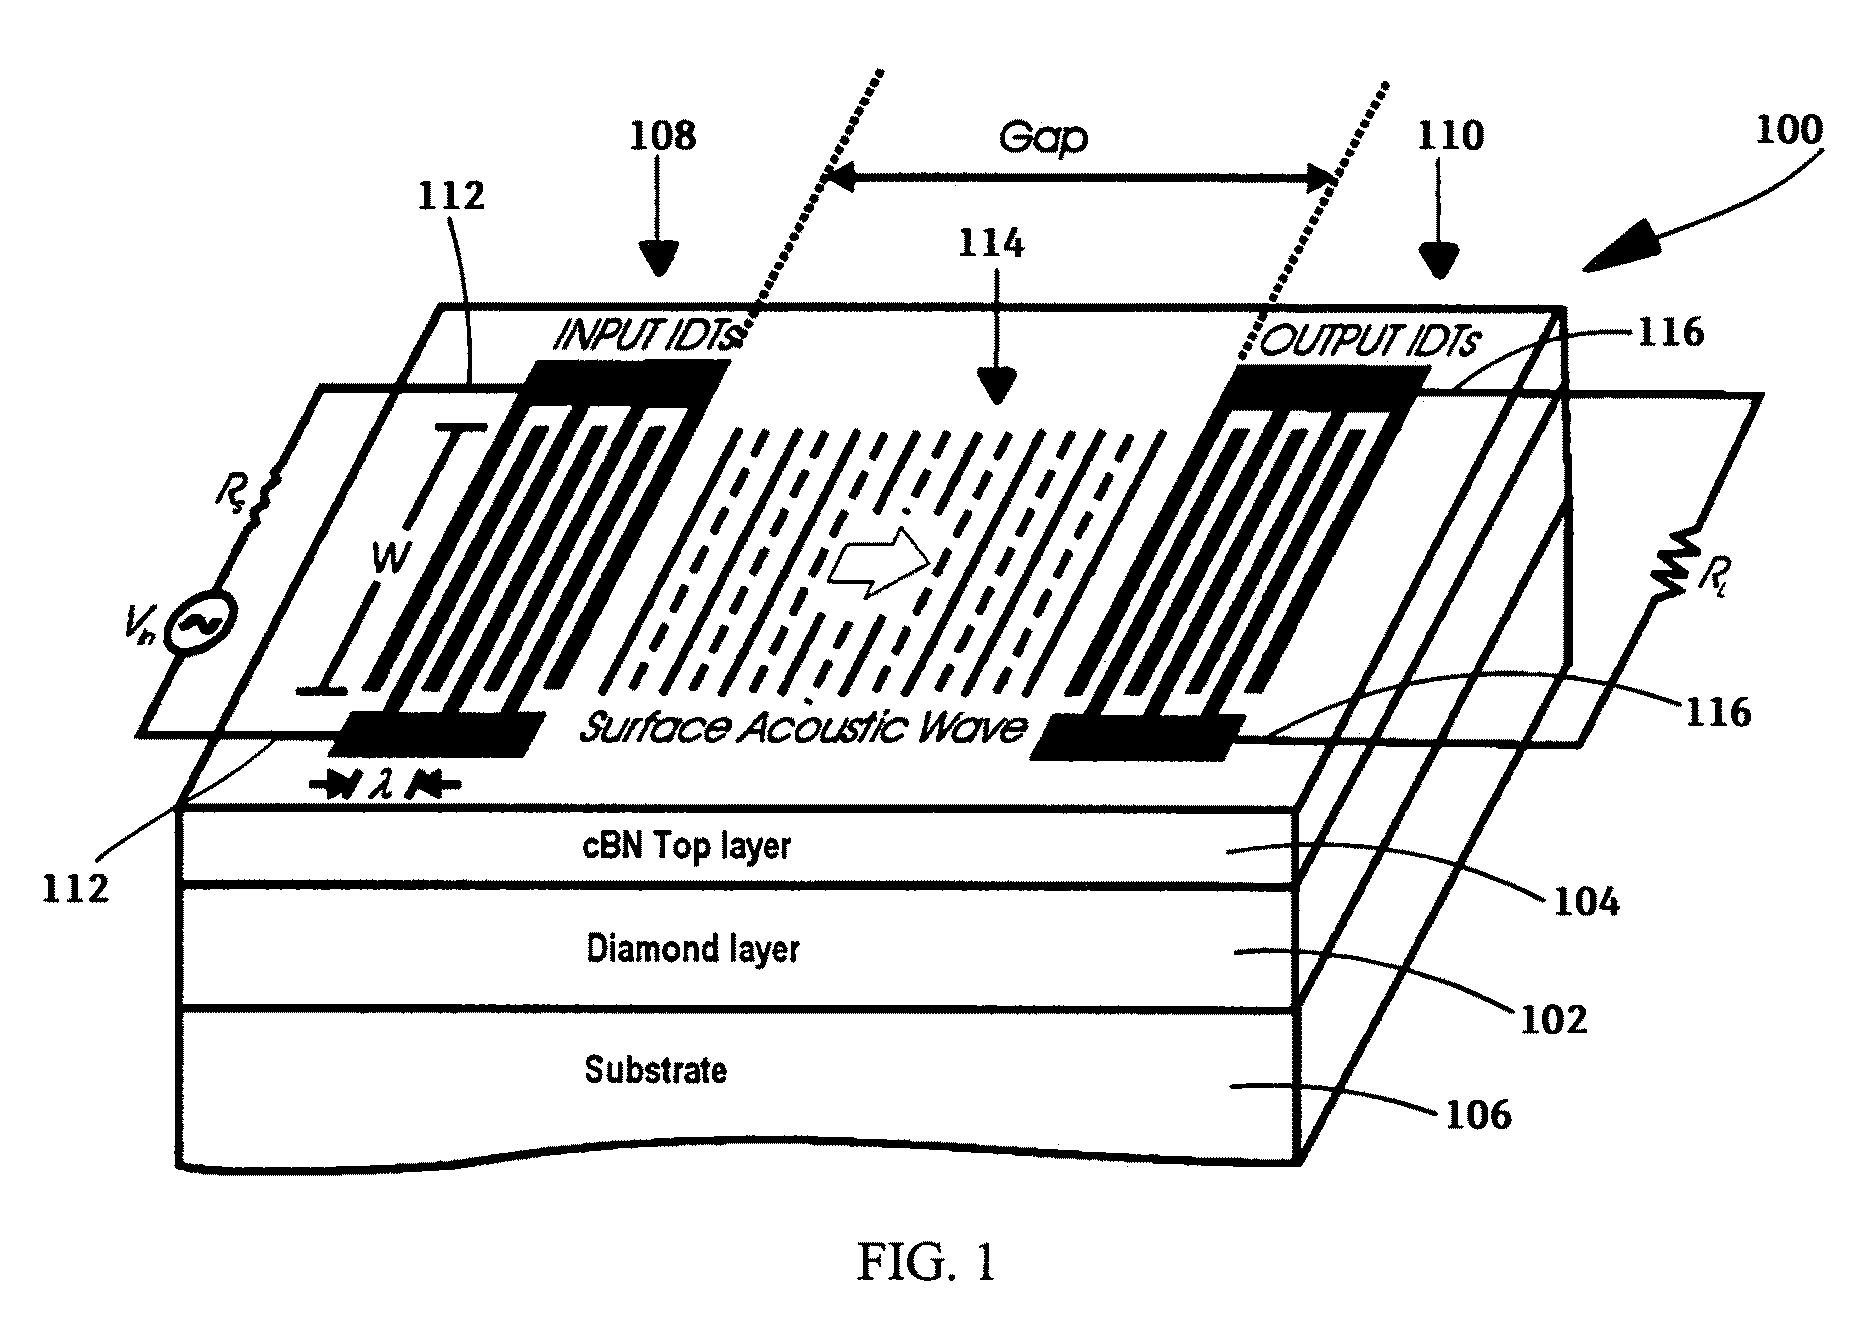 Surface acoustic wave (SAW) devices based on cubic boron nitride/diamond composite structures